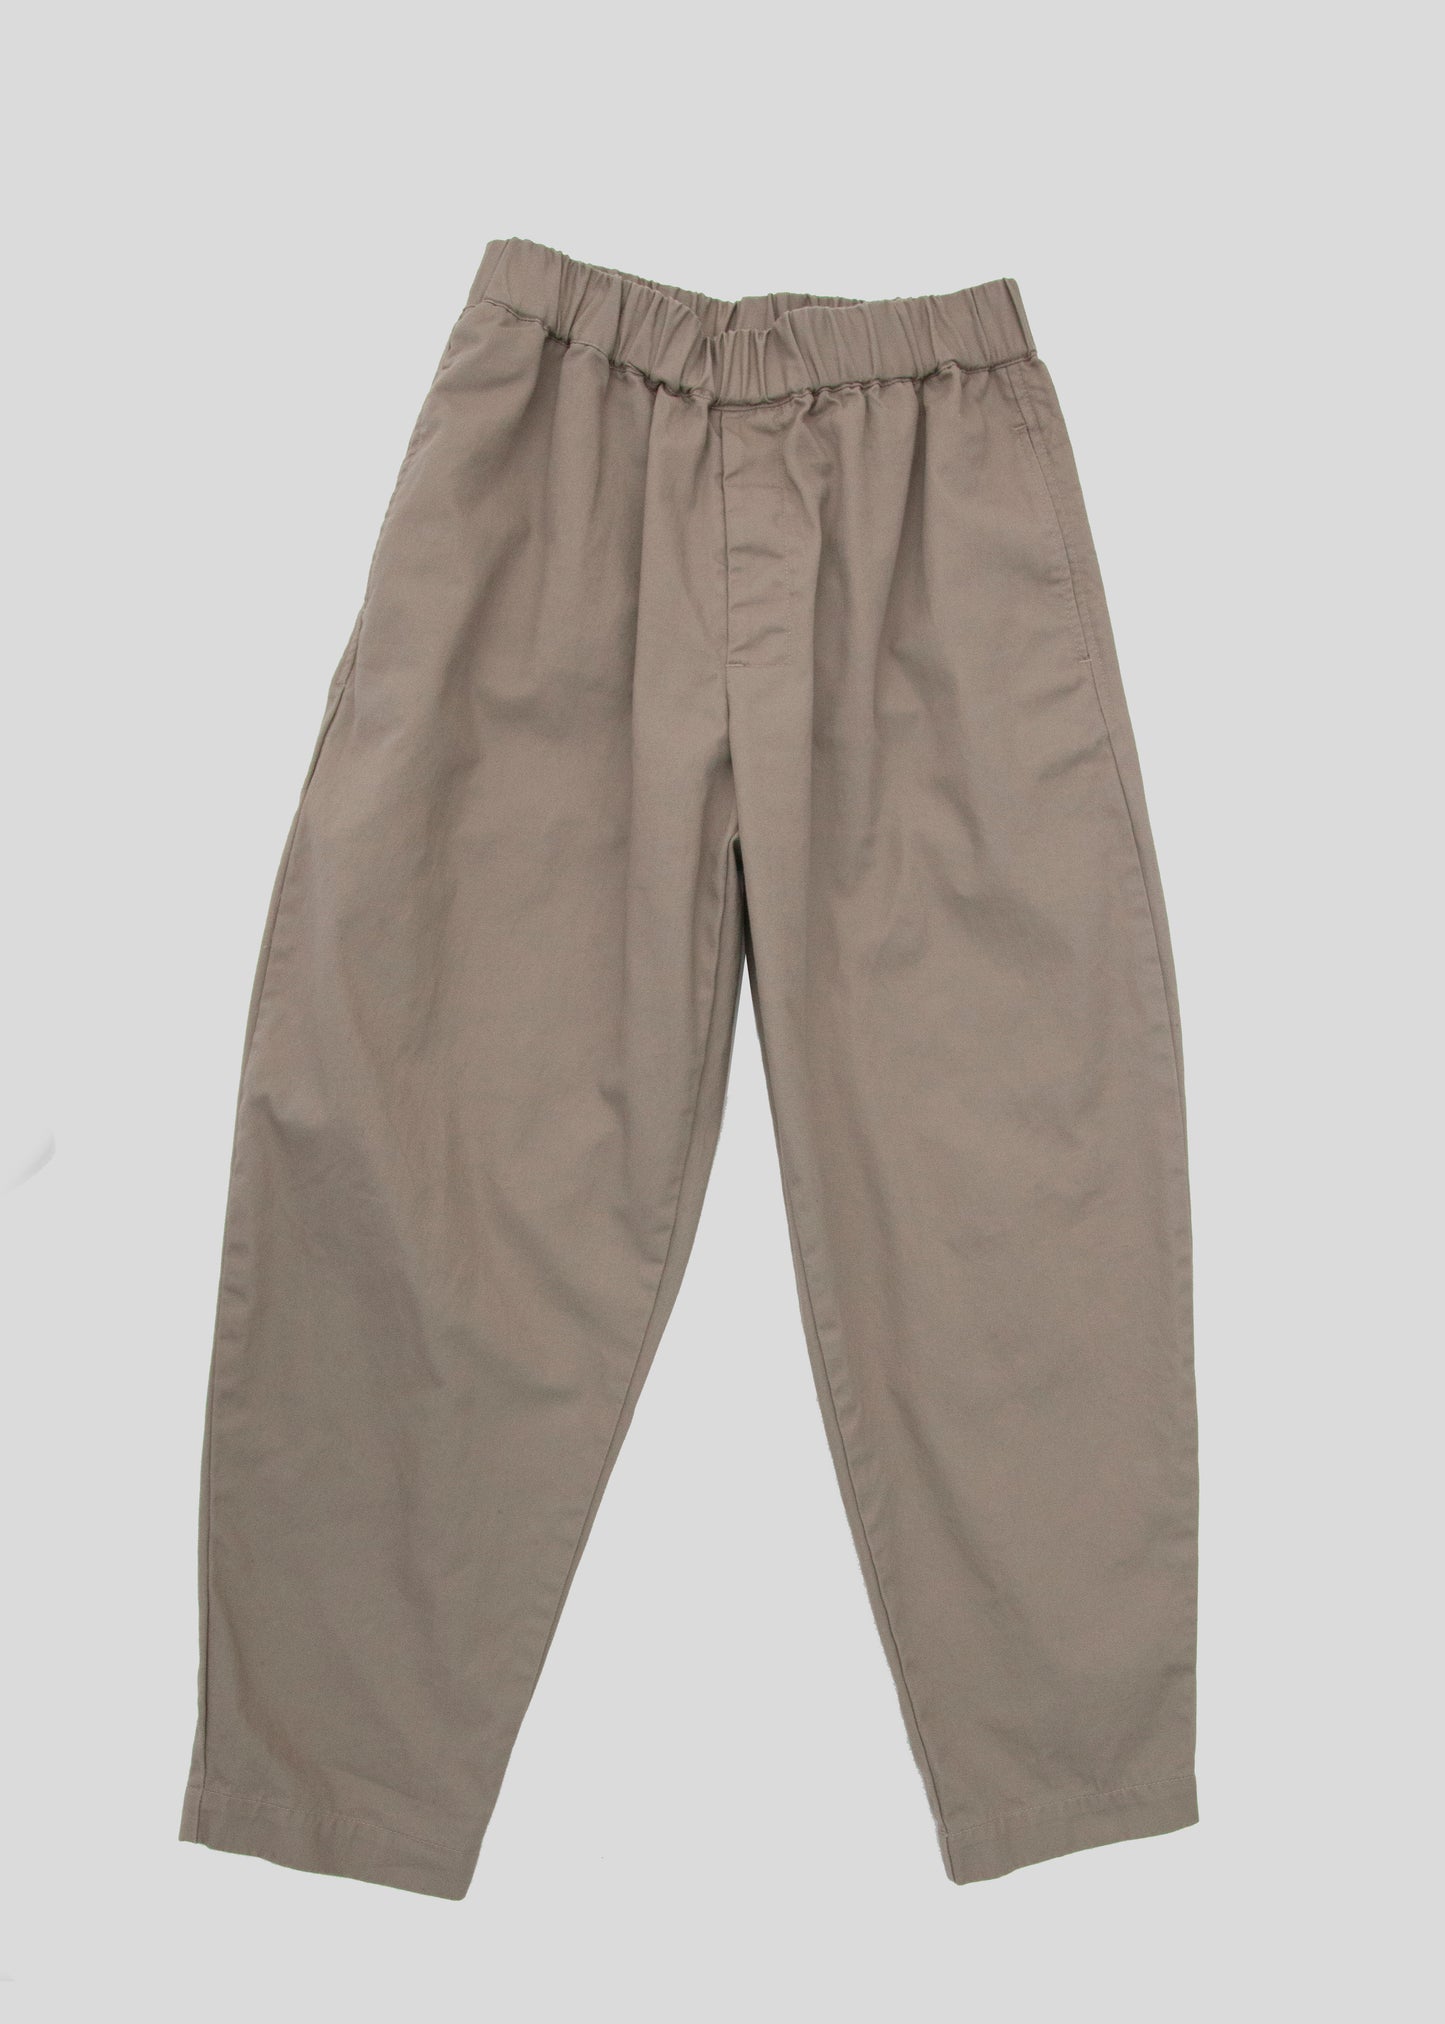 Front flat lay of gathered pants in color khaki